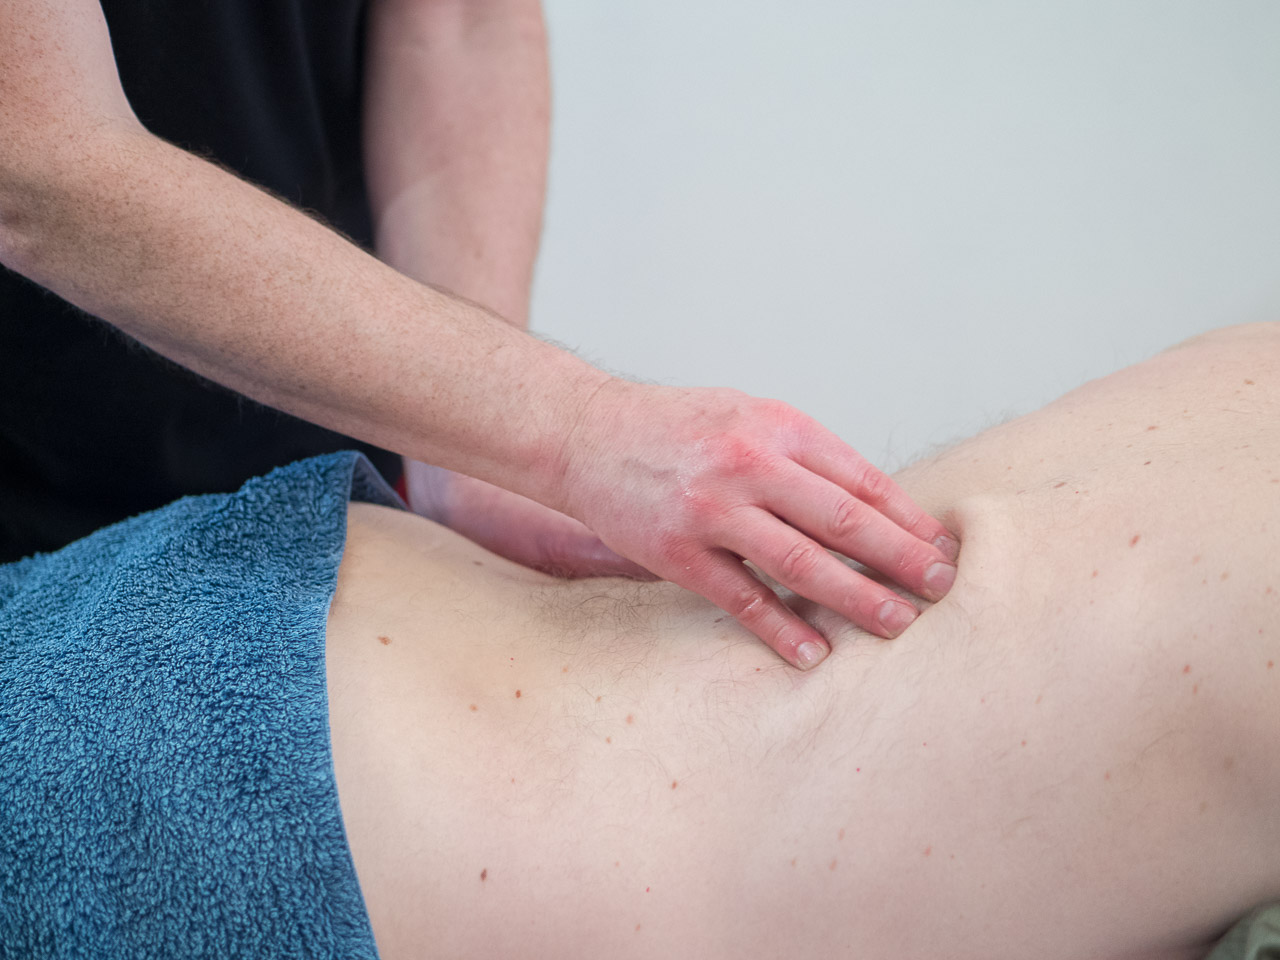 Therapeutic, sports and well-being back massage for men. Deep-tissue massage of the back, particularly of the lumbar region, brings relief to these areas that are often tense due to lifestyle and emotions.